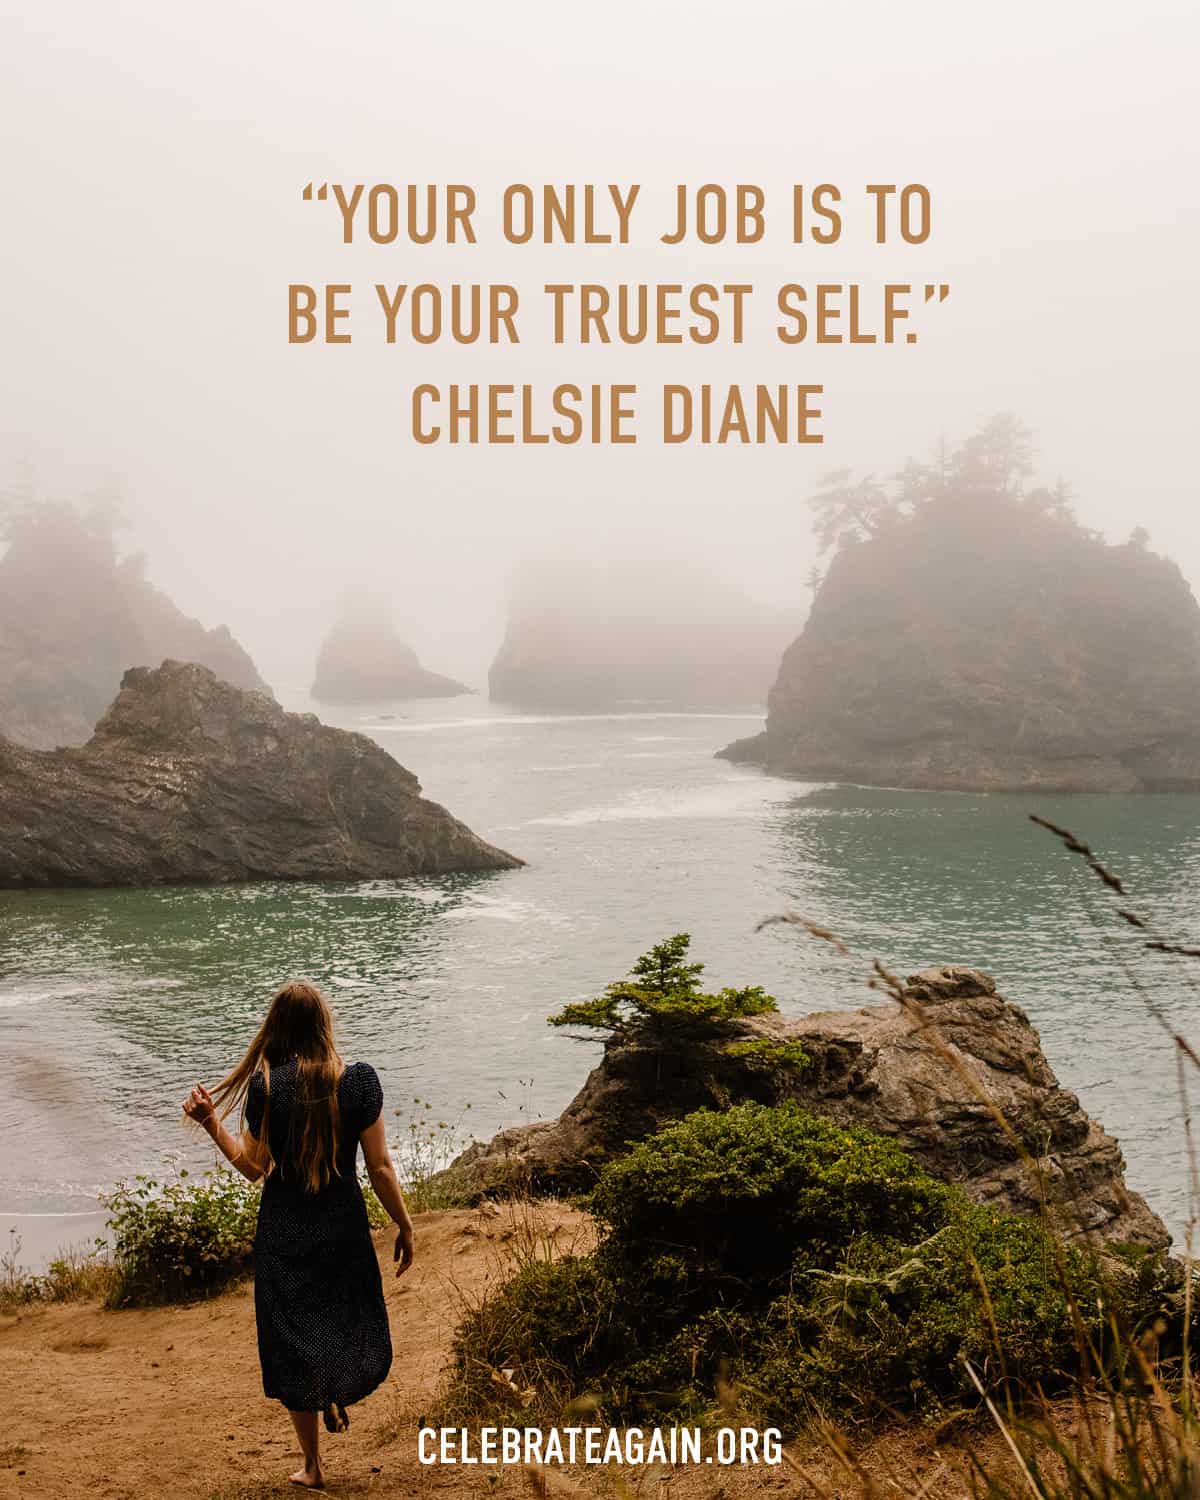 a short self love quote saying "Your only job is to be your truest self.” Chelsie Diane" on an image of a woman on a coast scenery with sea rocks and fog